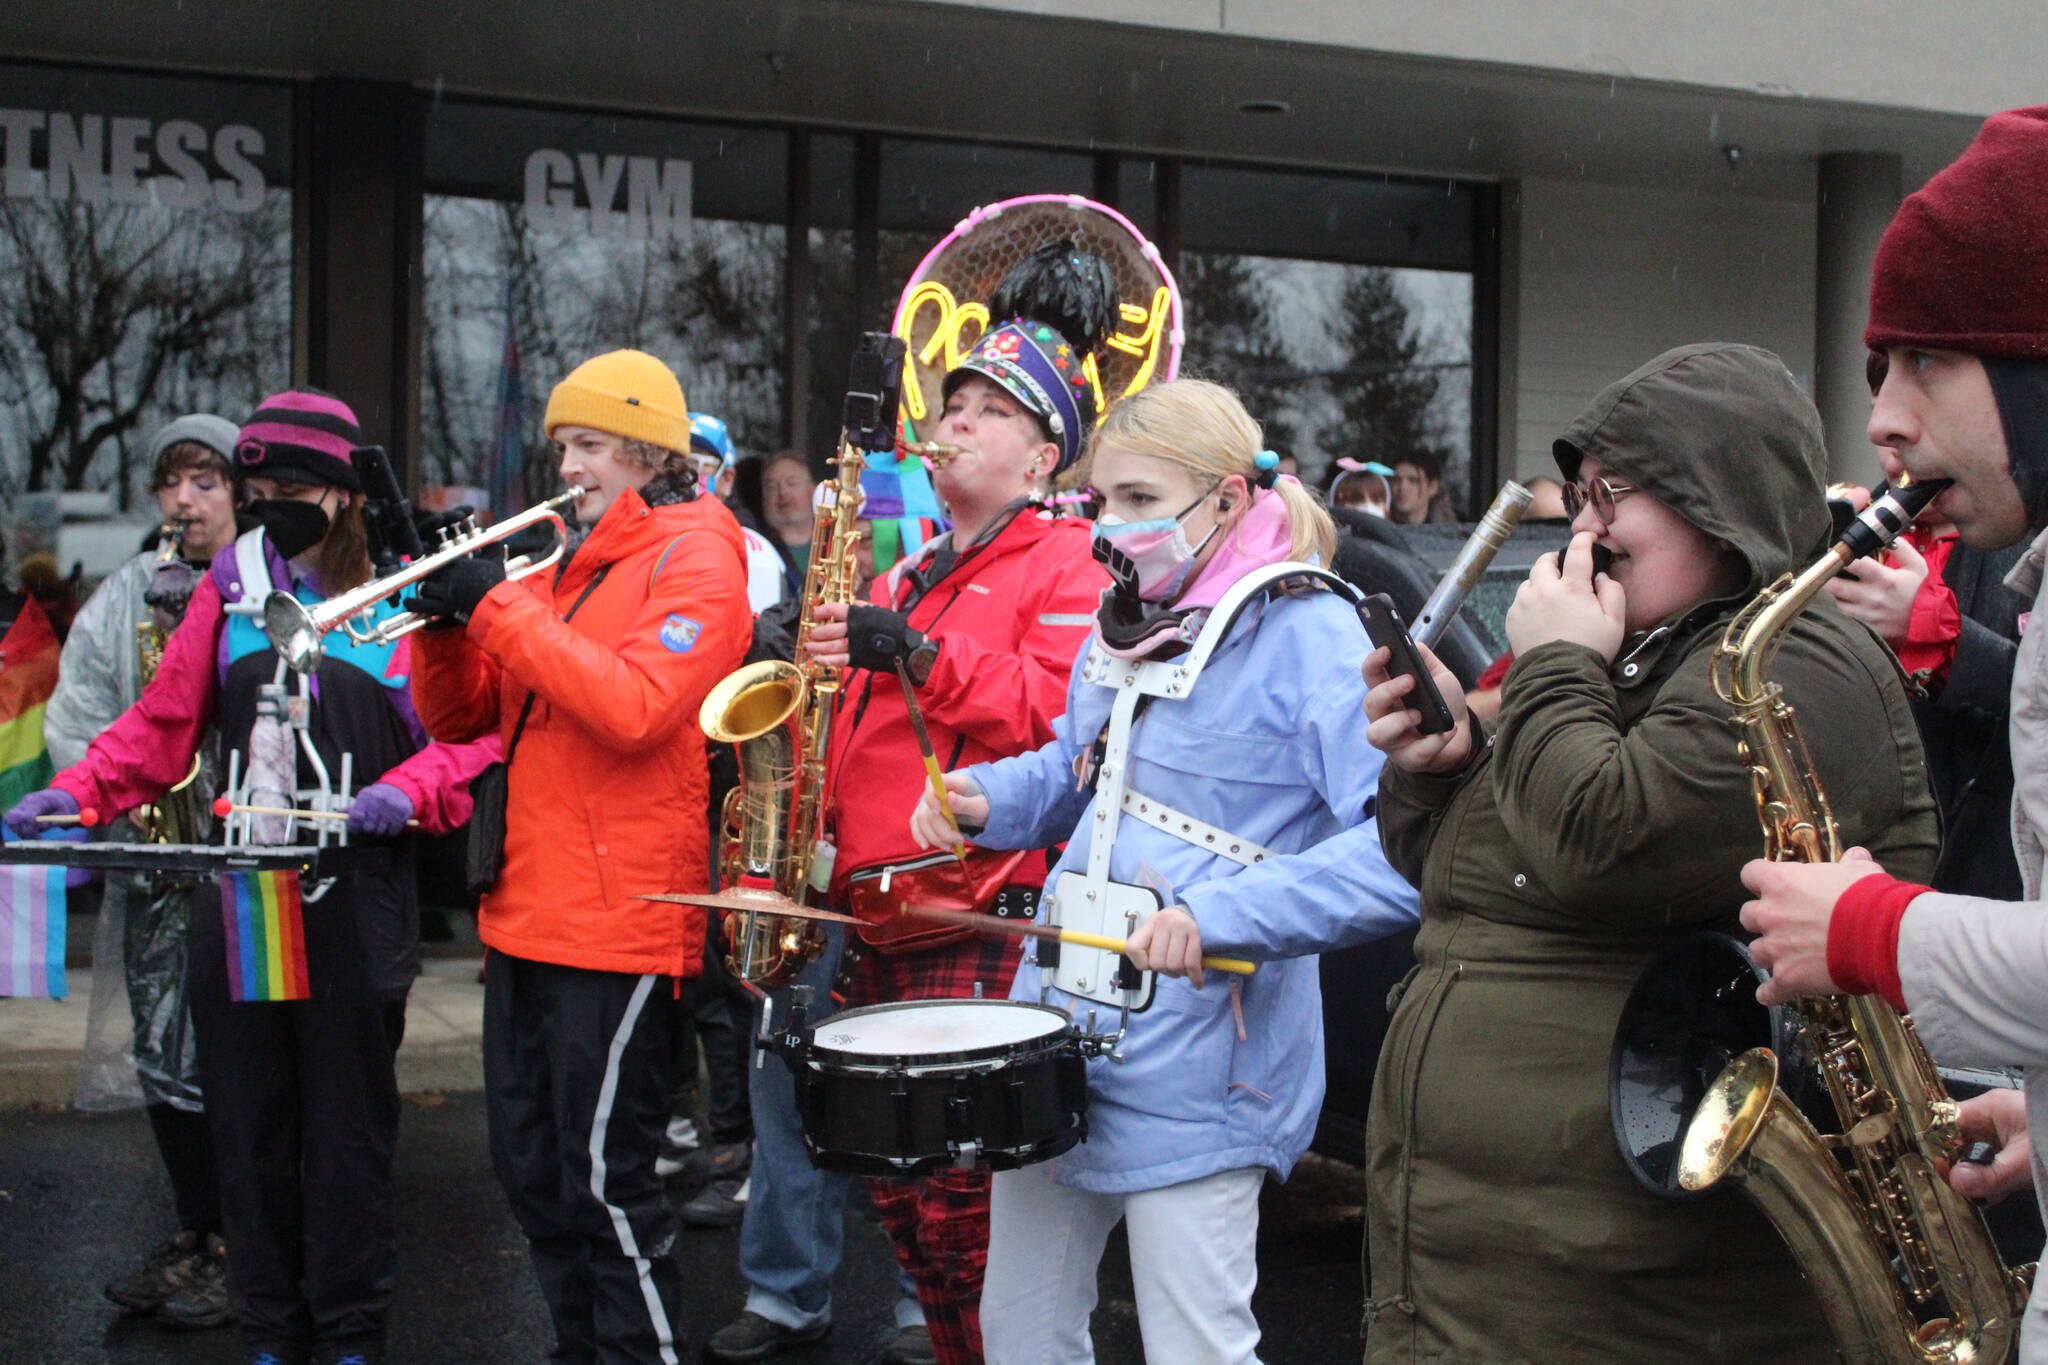 A marching band joined the counter-protest and performed several songs throughout the day. Photo by Bailey Jo Josie/Sound Publishing.